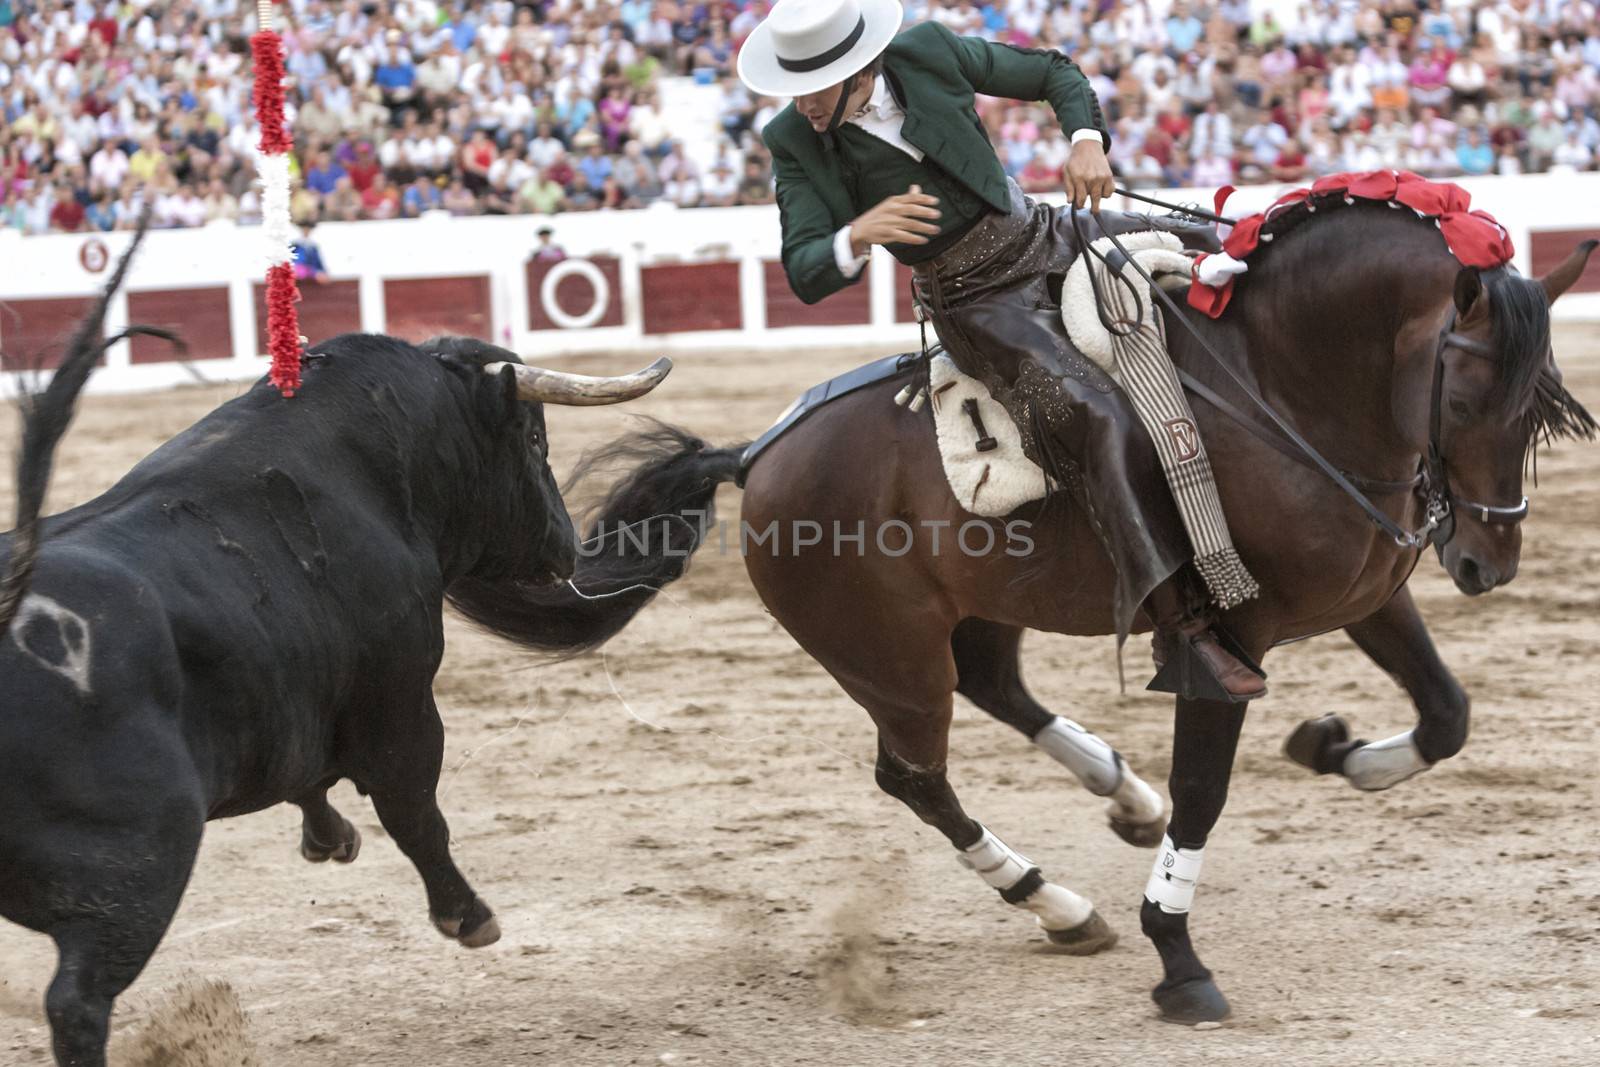 Linares, Jaen province, SPAIN- 37 august 2011: Spanish bullfighter on horseback Diego Ventura bullfighting on horseback, nails a flag of red on the back of the bull jumping trying to achieve with their horns to the bullfighter, in Linares, Jaen province, Andalusia, Spain